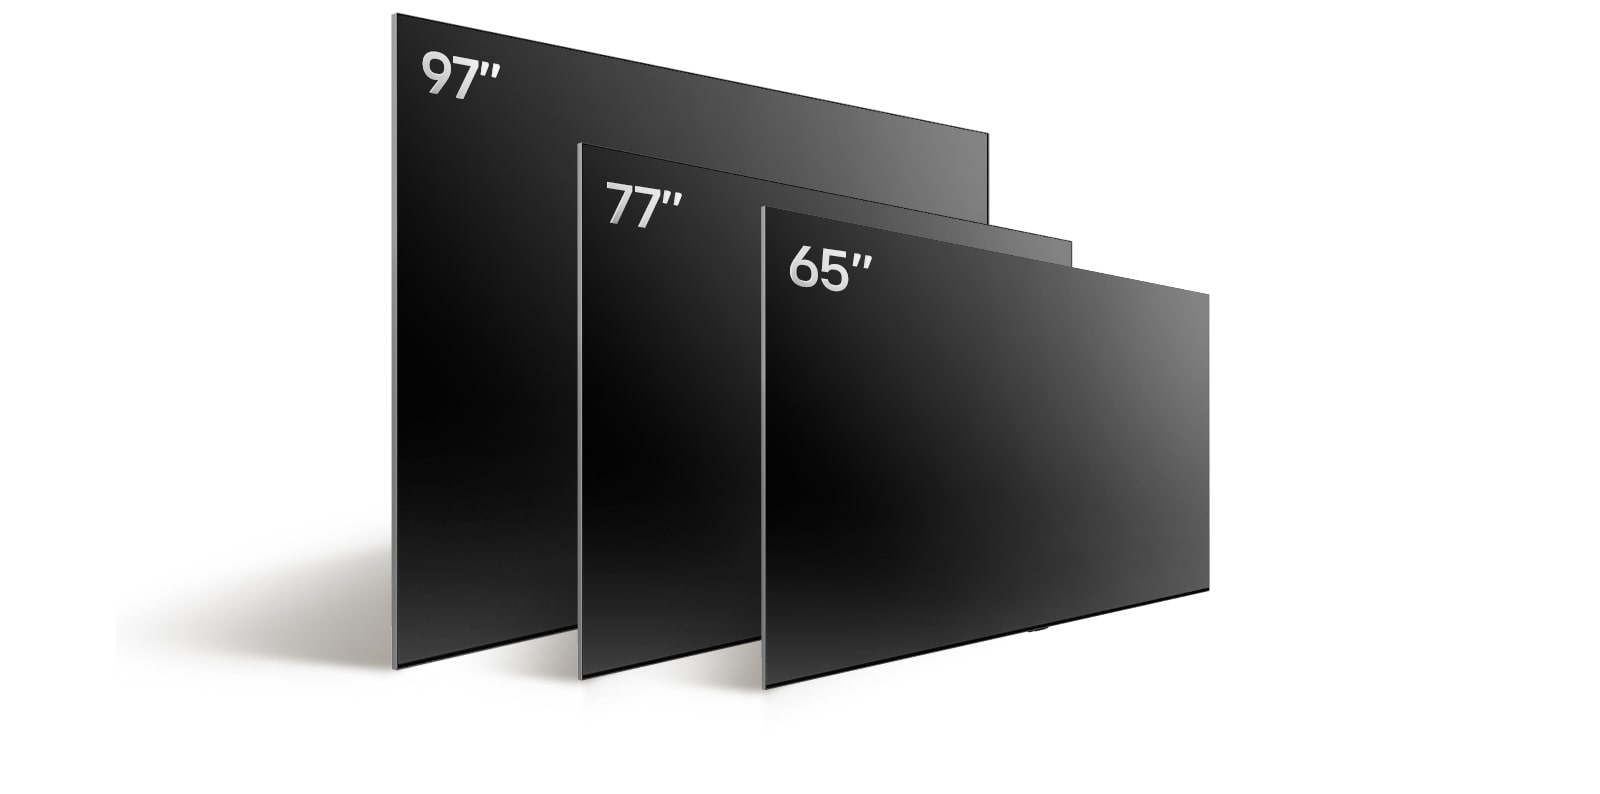 An image comparing LG OLED G4's varying sizes, showing  65", 77", and 97".	